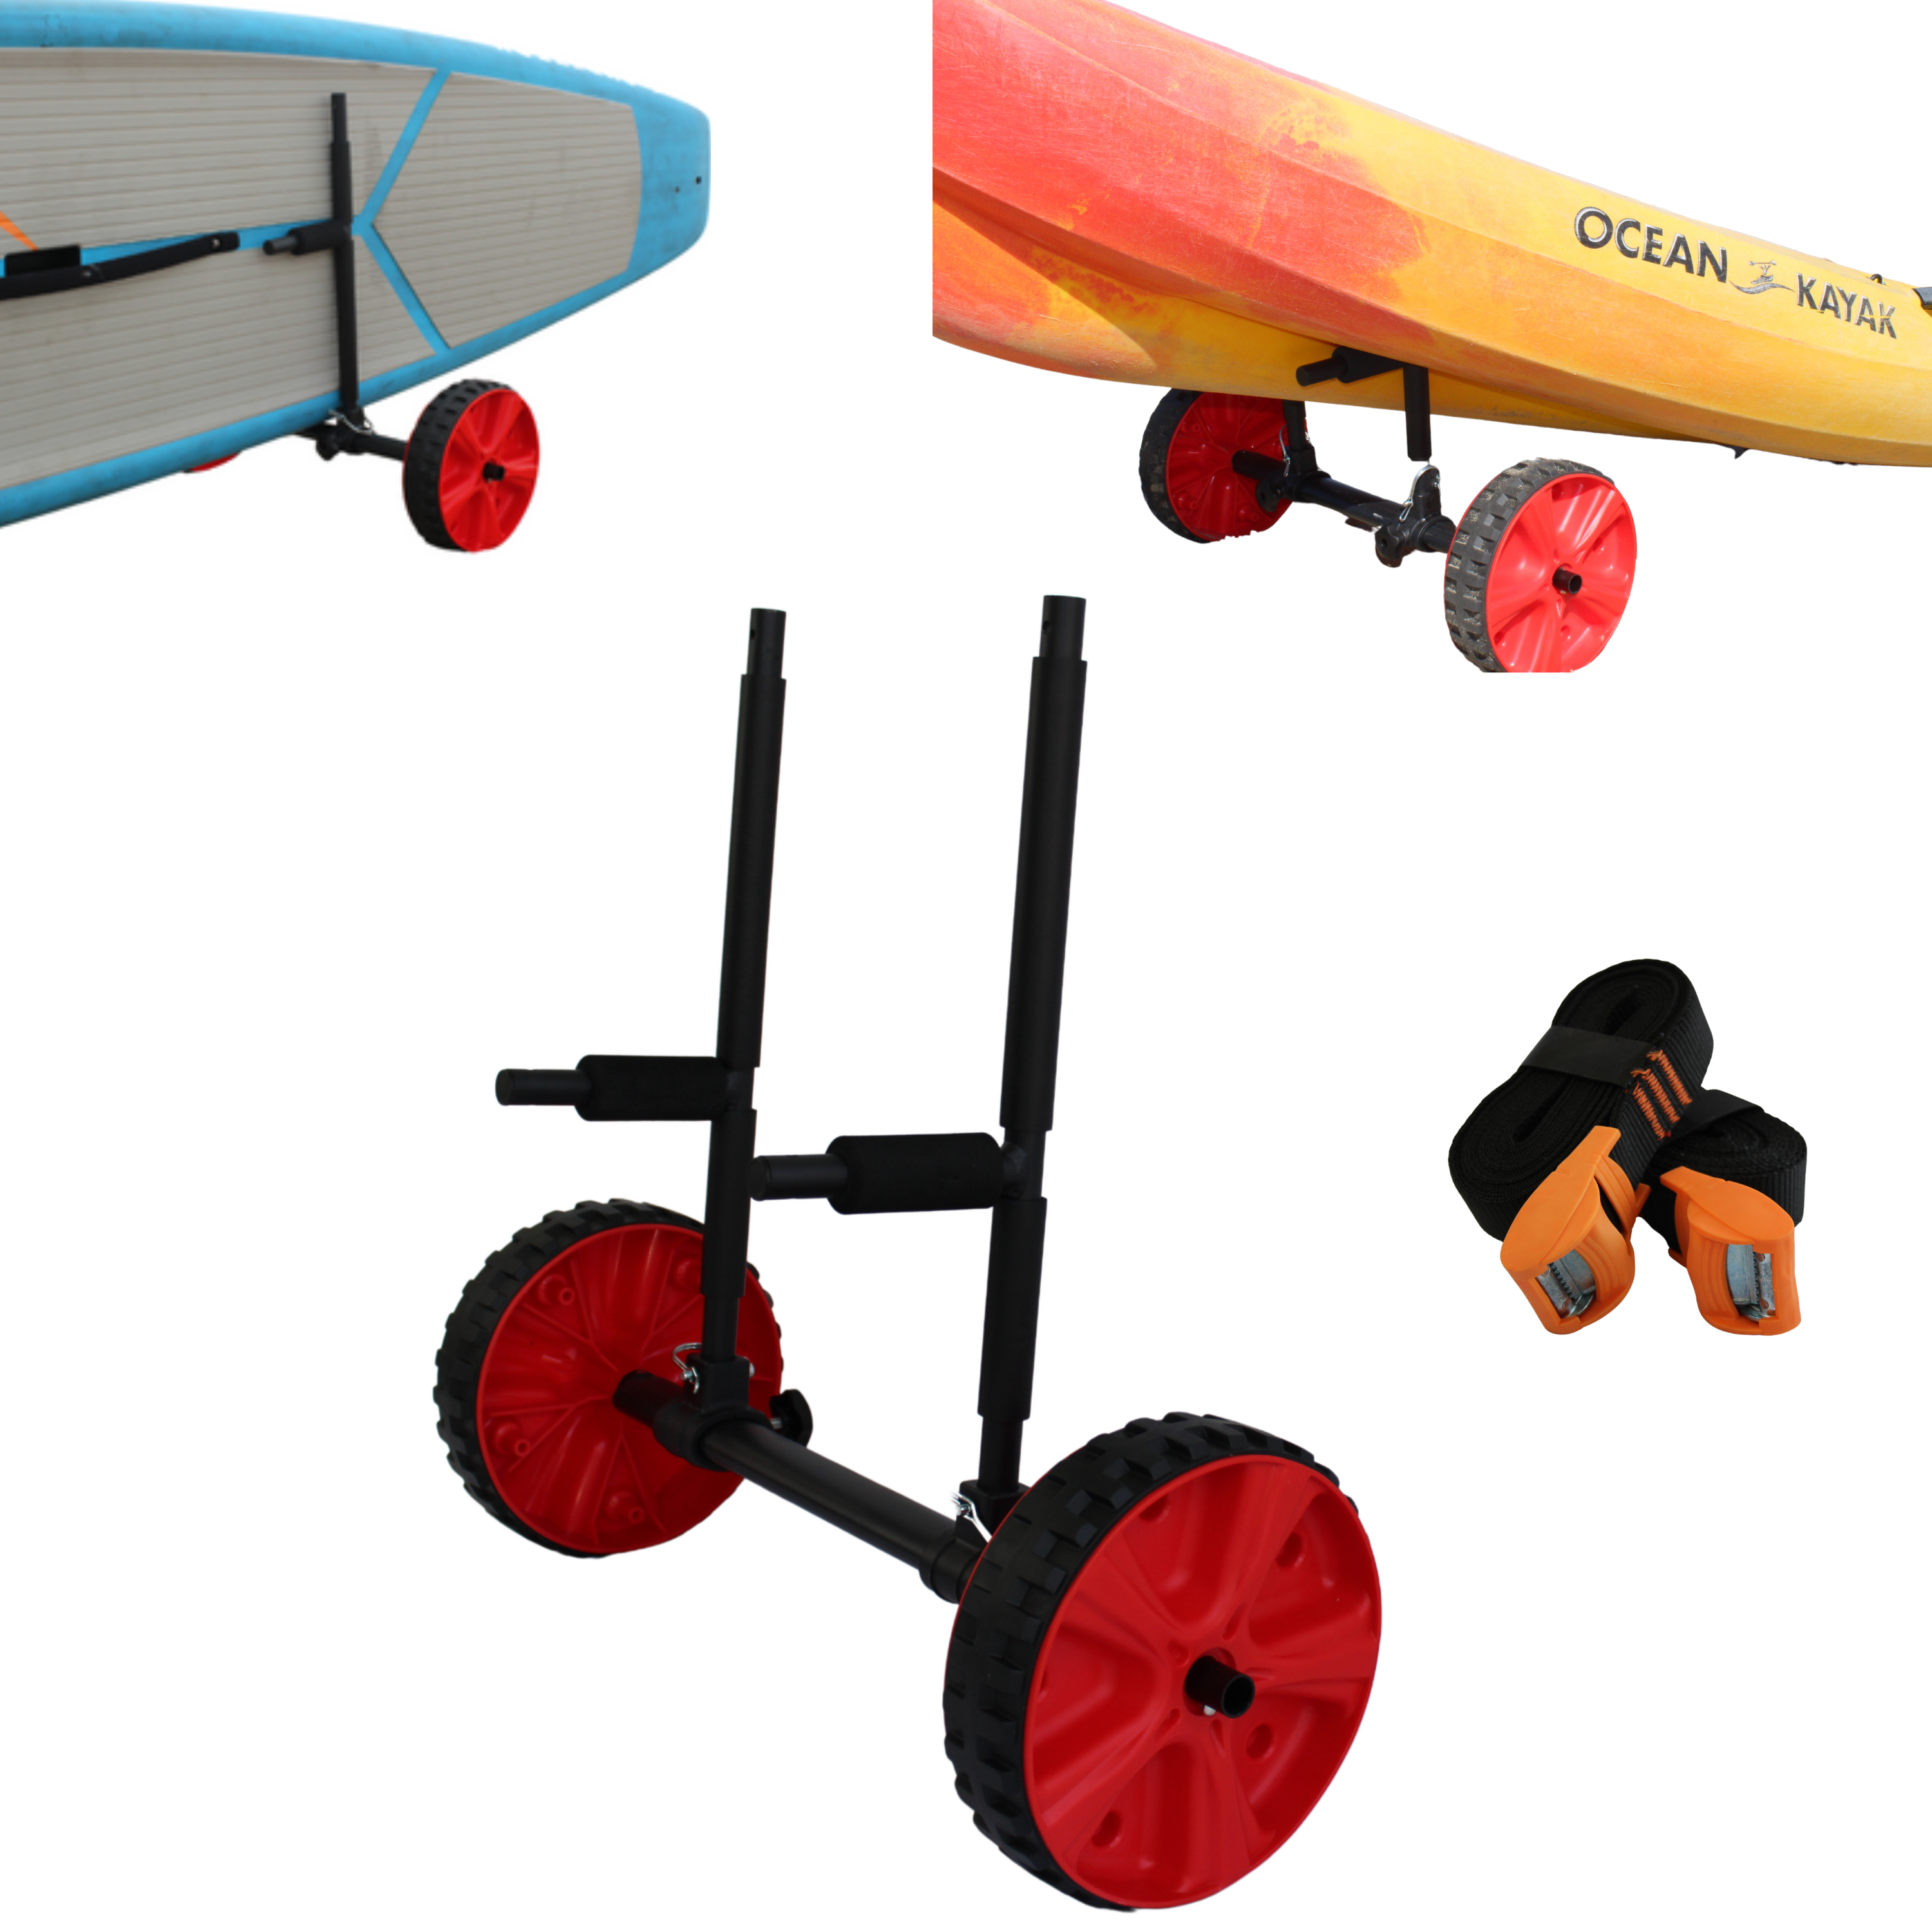 Adjustable 2 in 1 SUP and Kayak Transport Cart